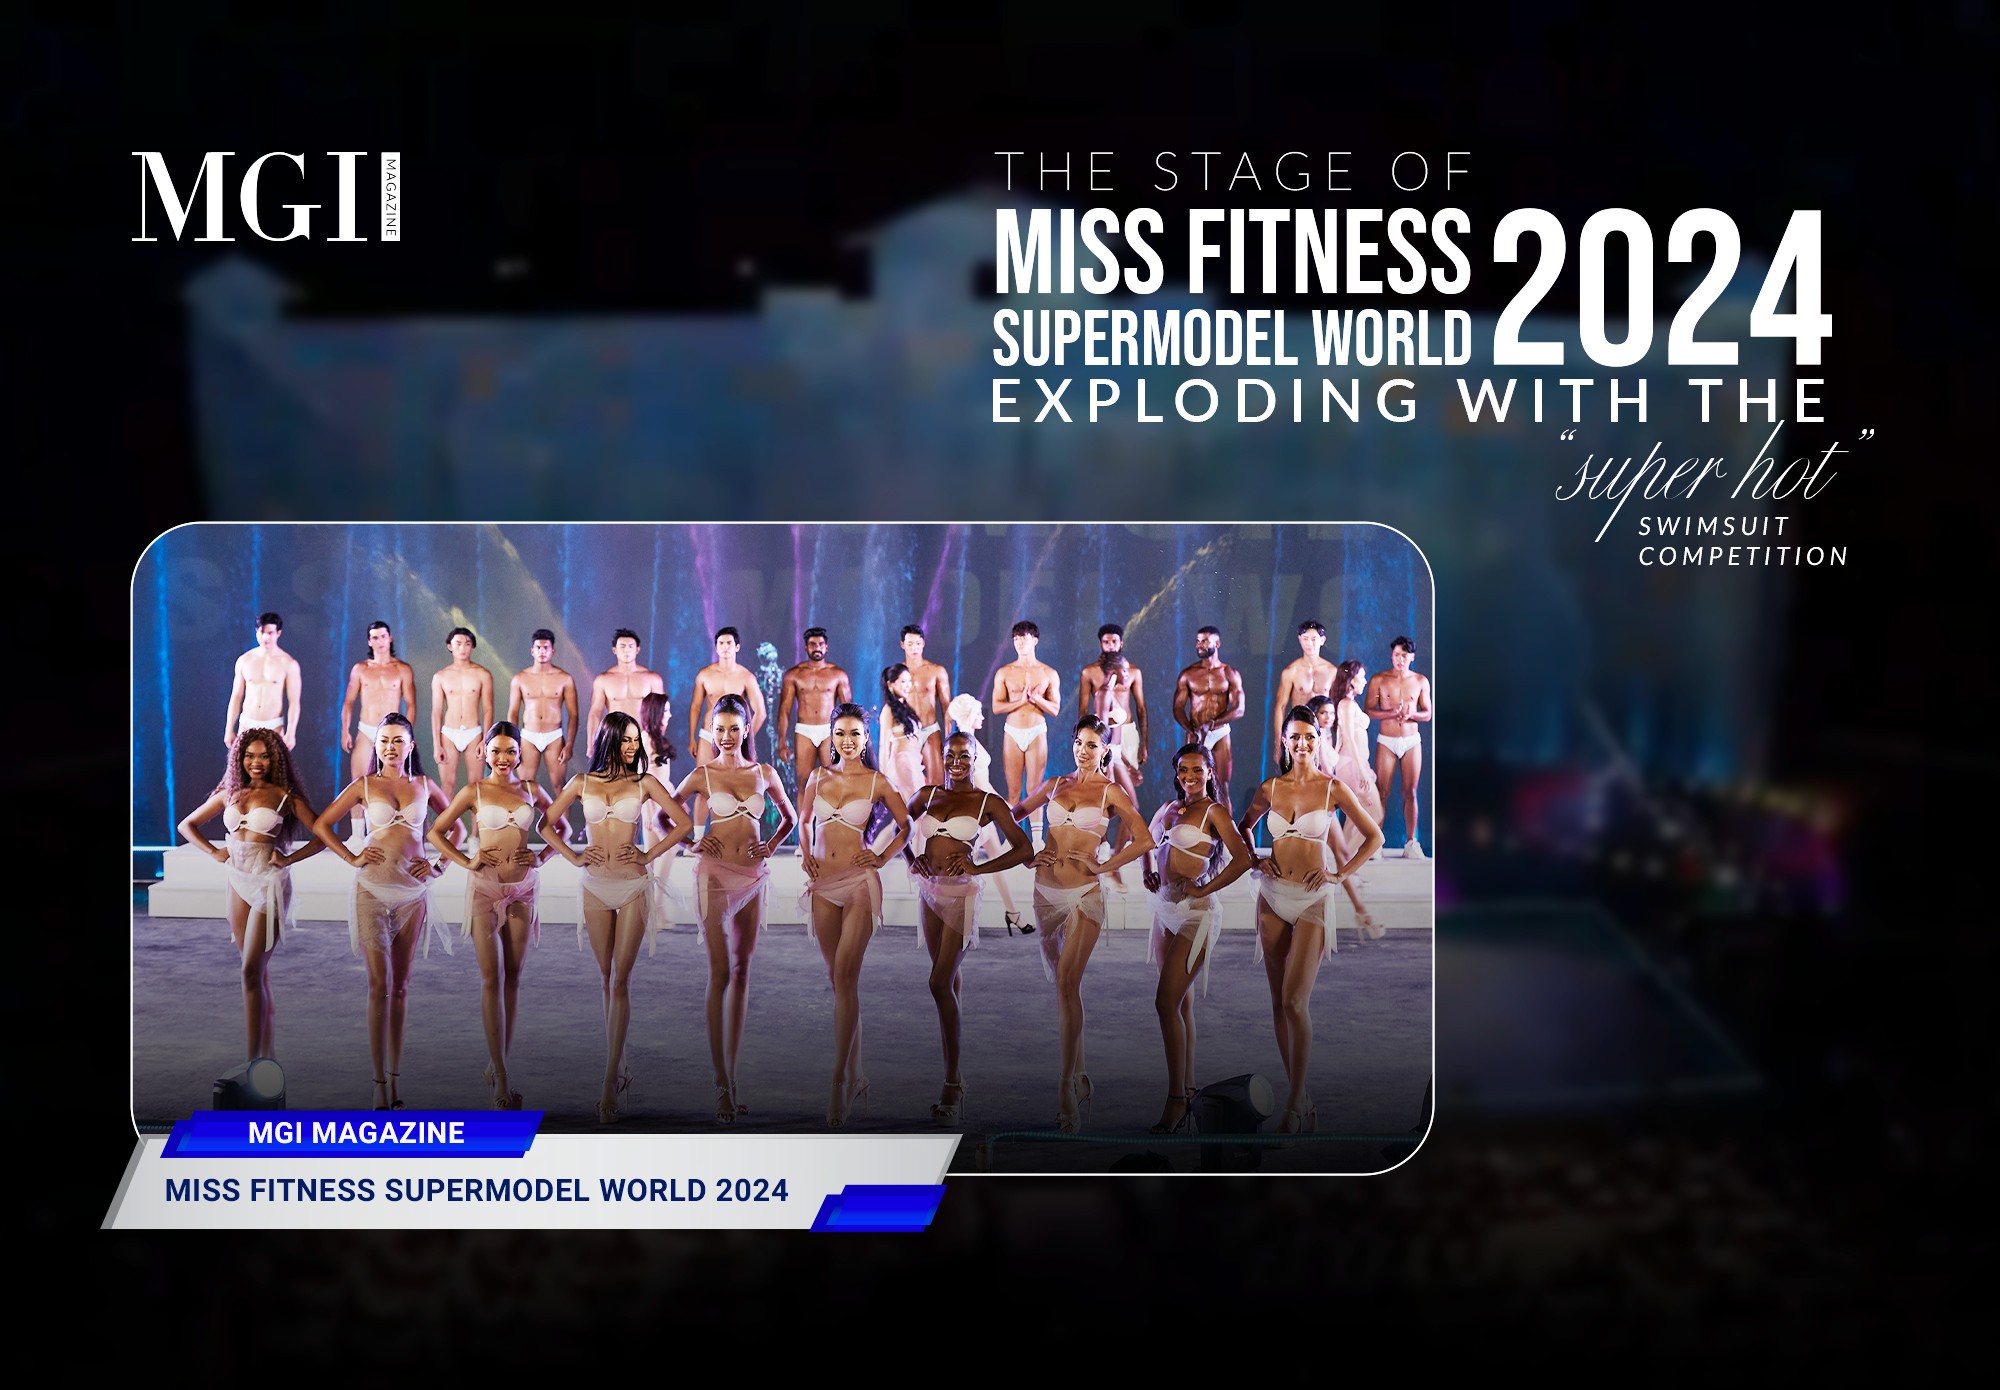 The stage of Miss Fitness Supermodel World 2024 exploding with the “super hot” swimsuit competition